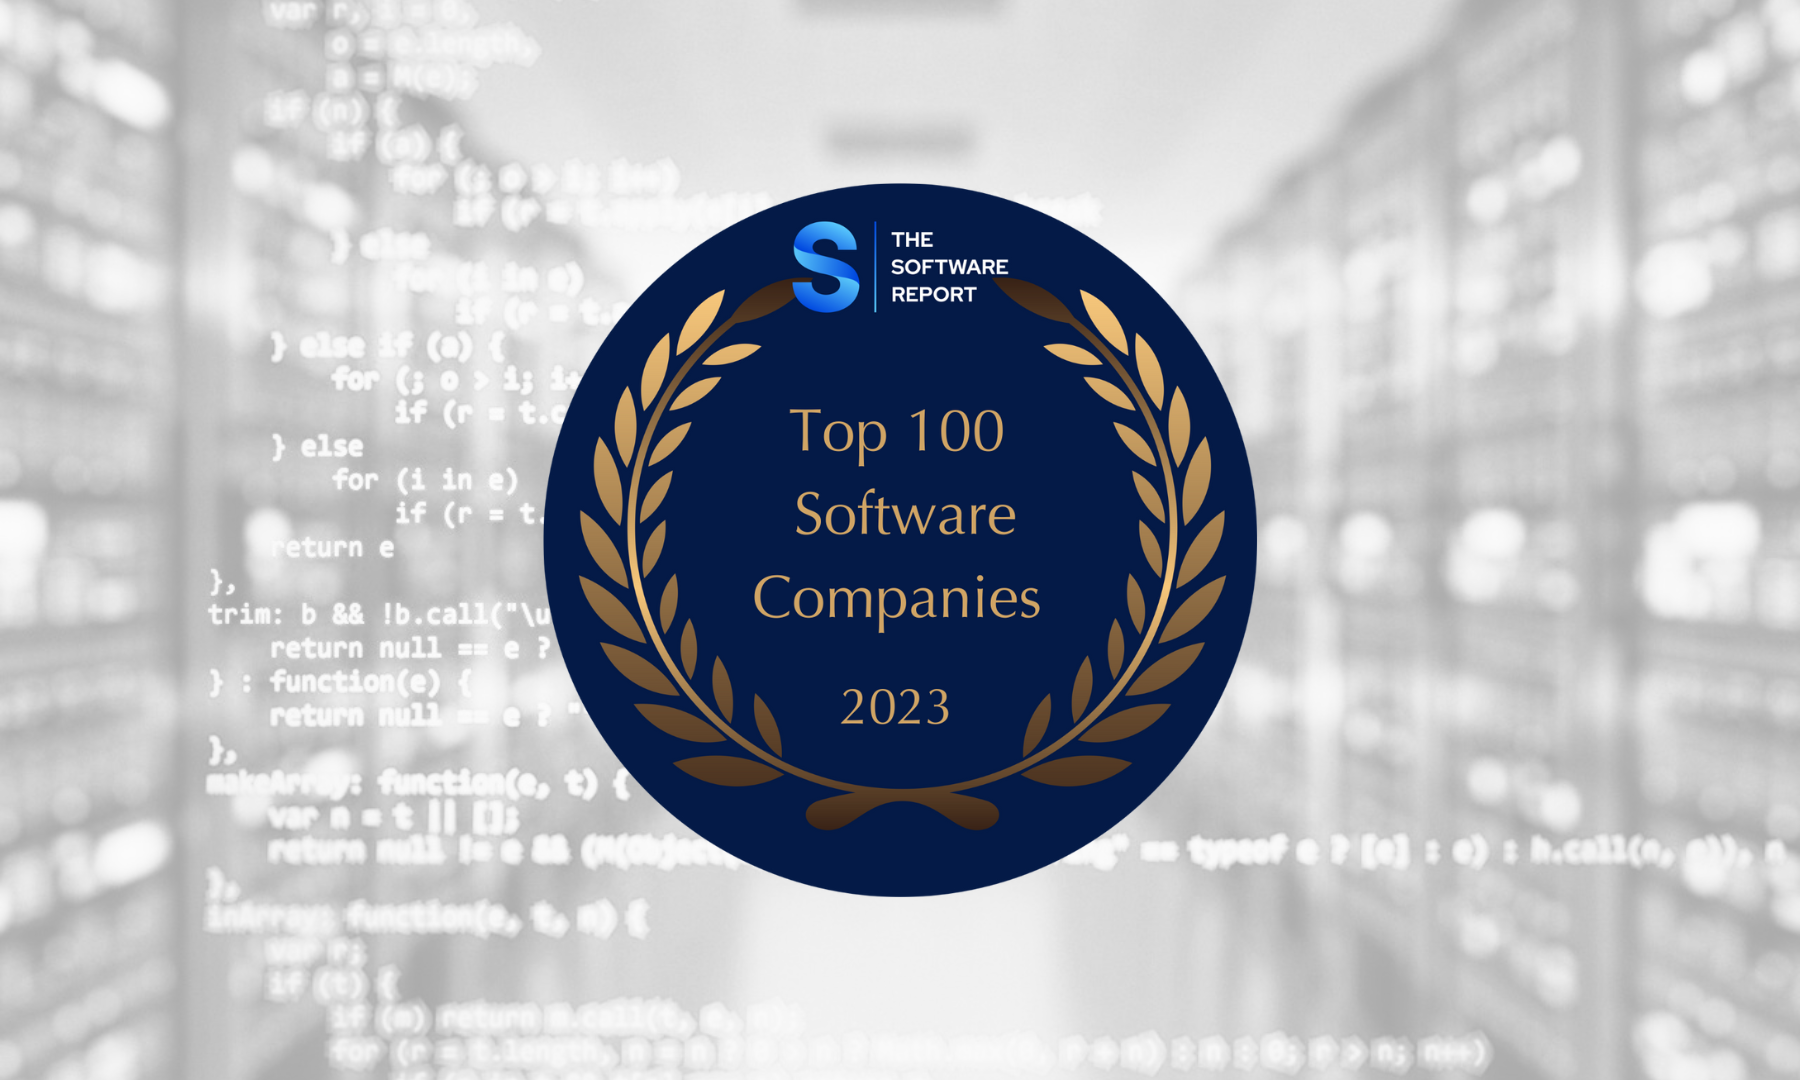 The Top 100 Software Companies of 2023